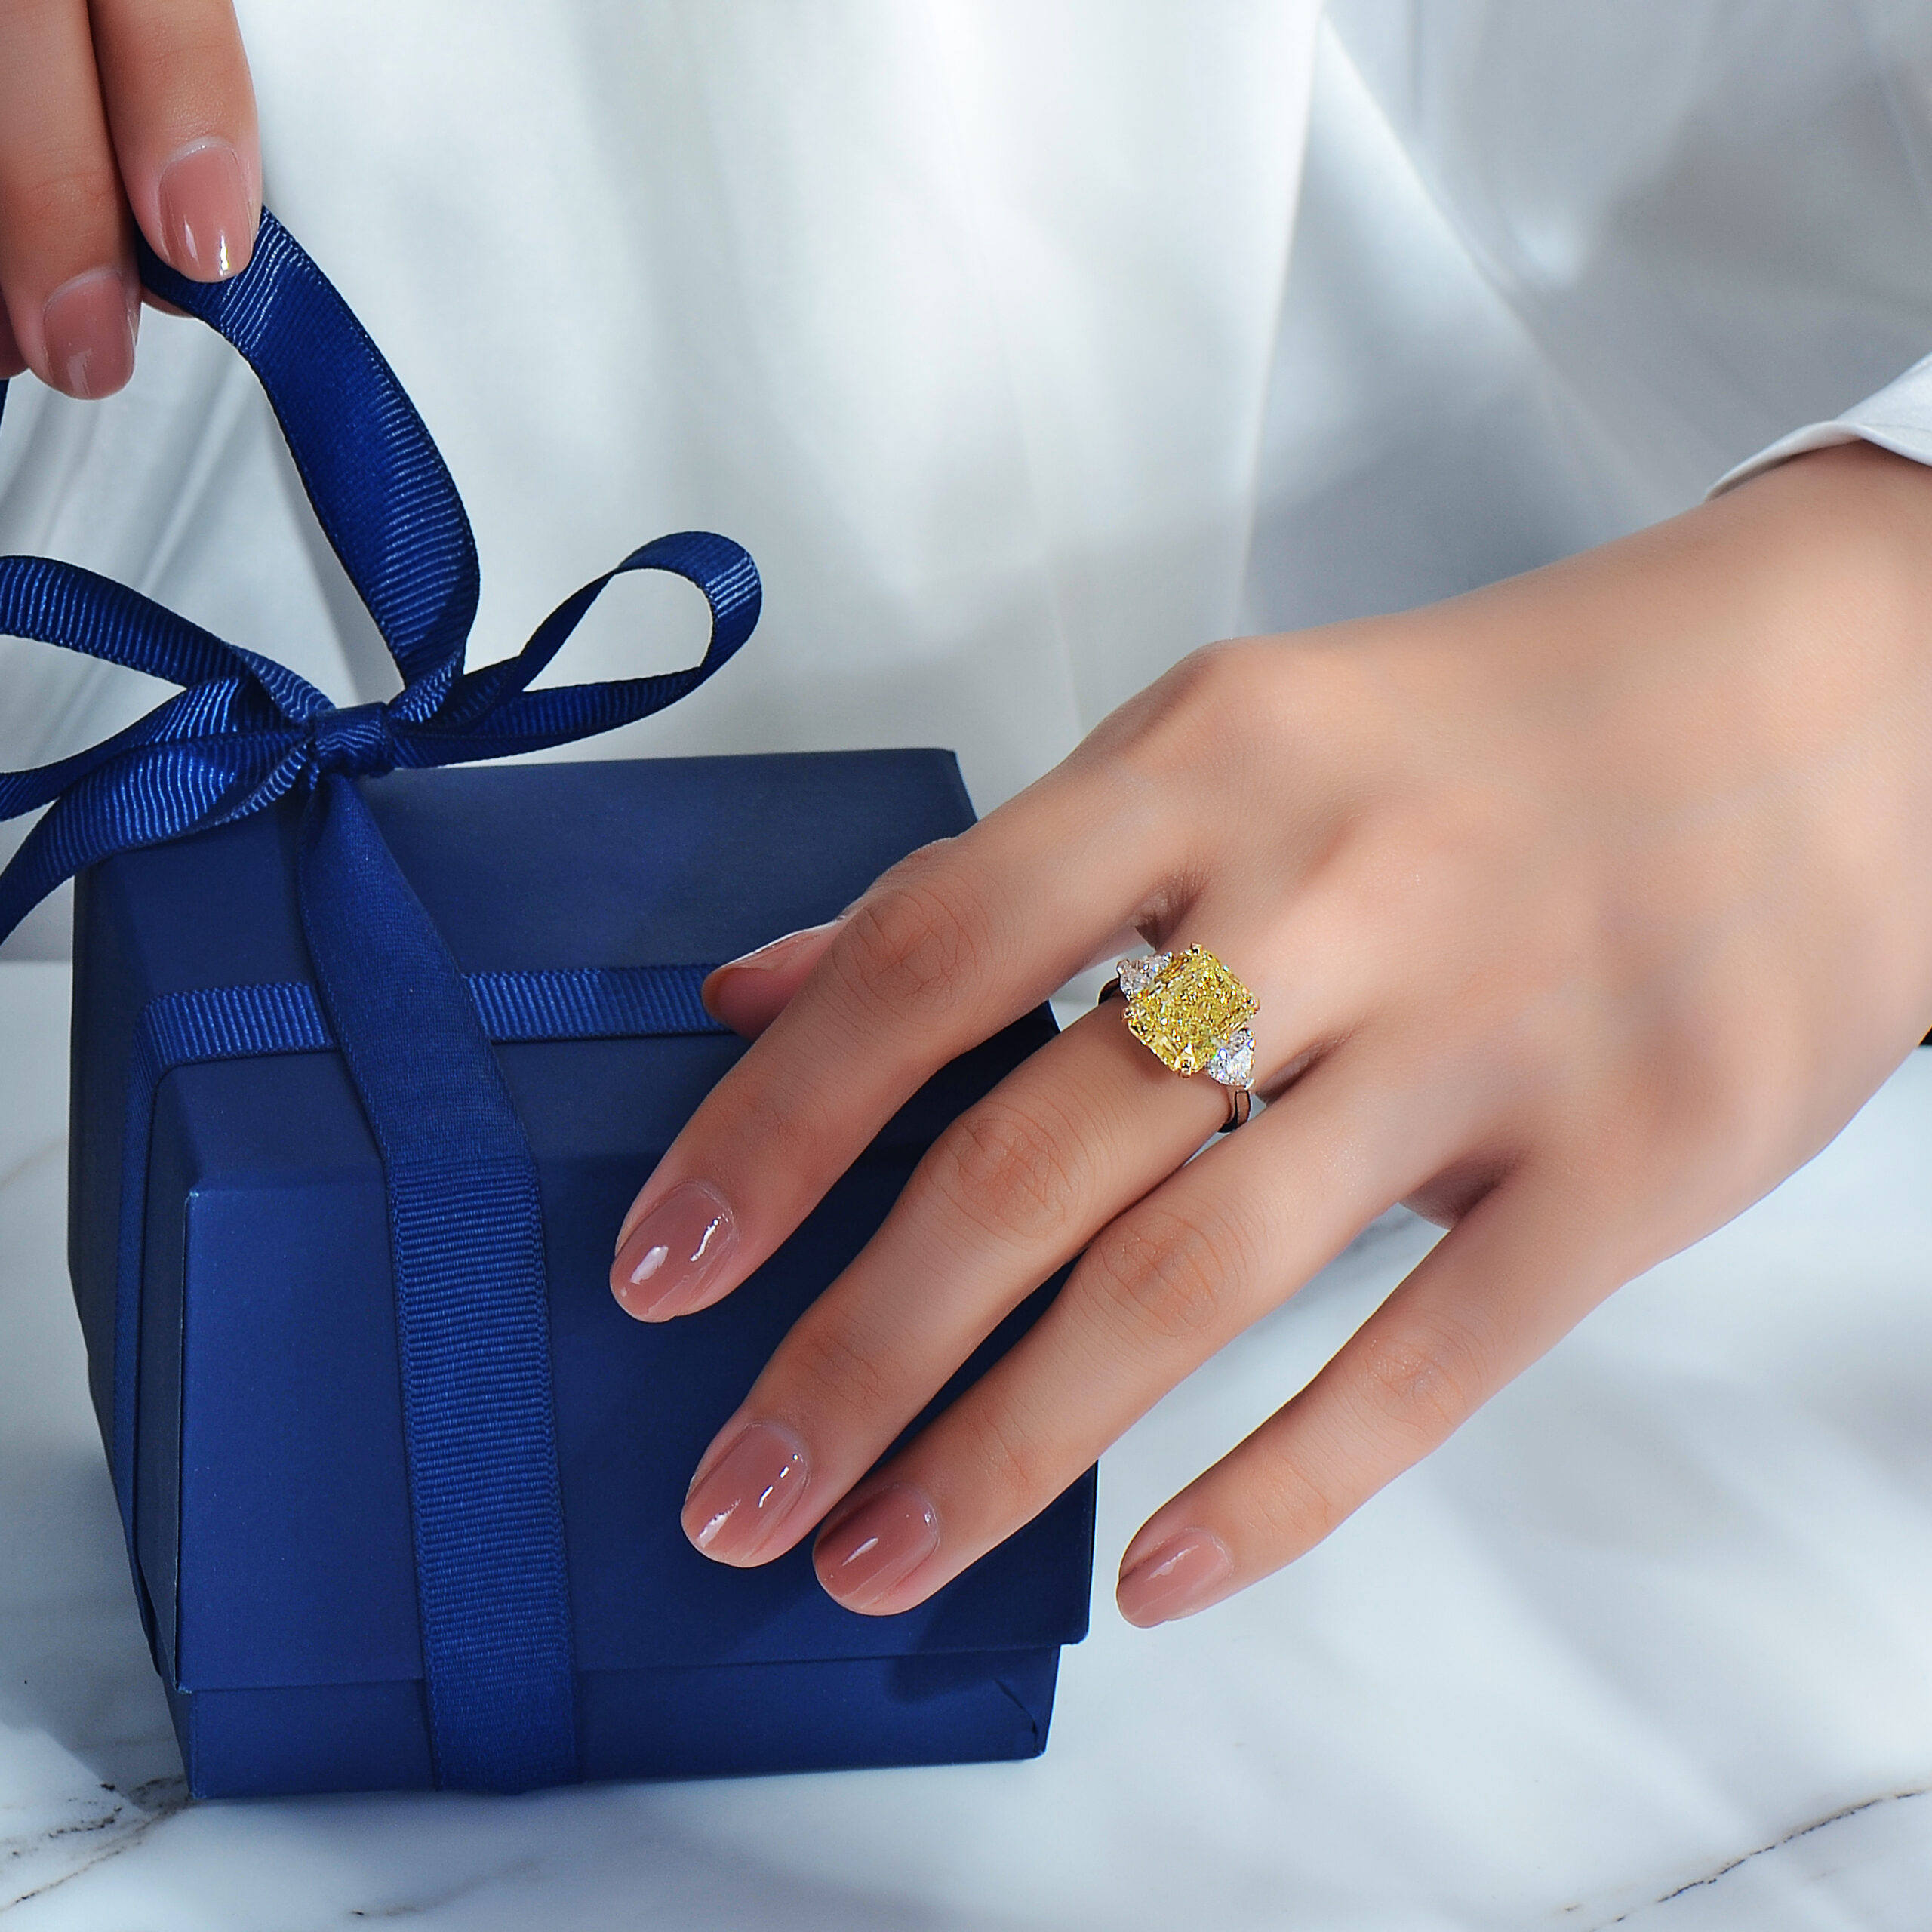 Great Anytime Diamond Gifts That Are Not Diamond Engagement Rings